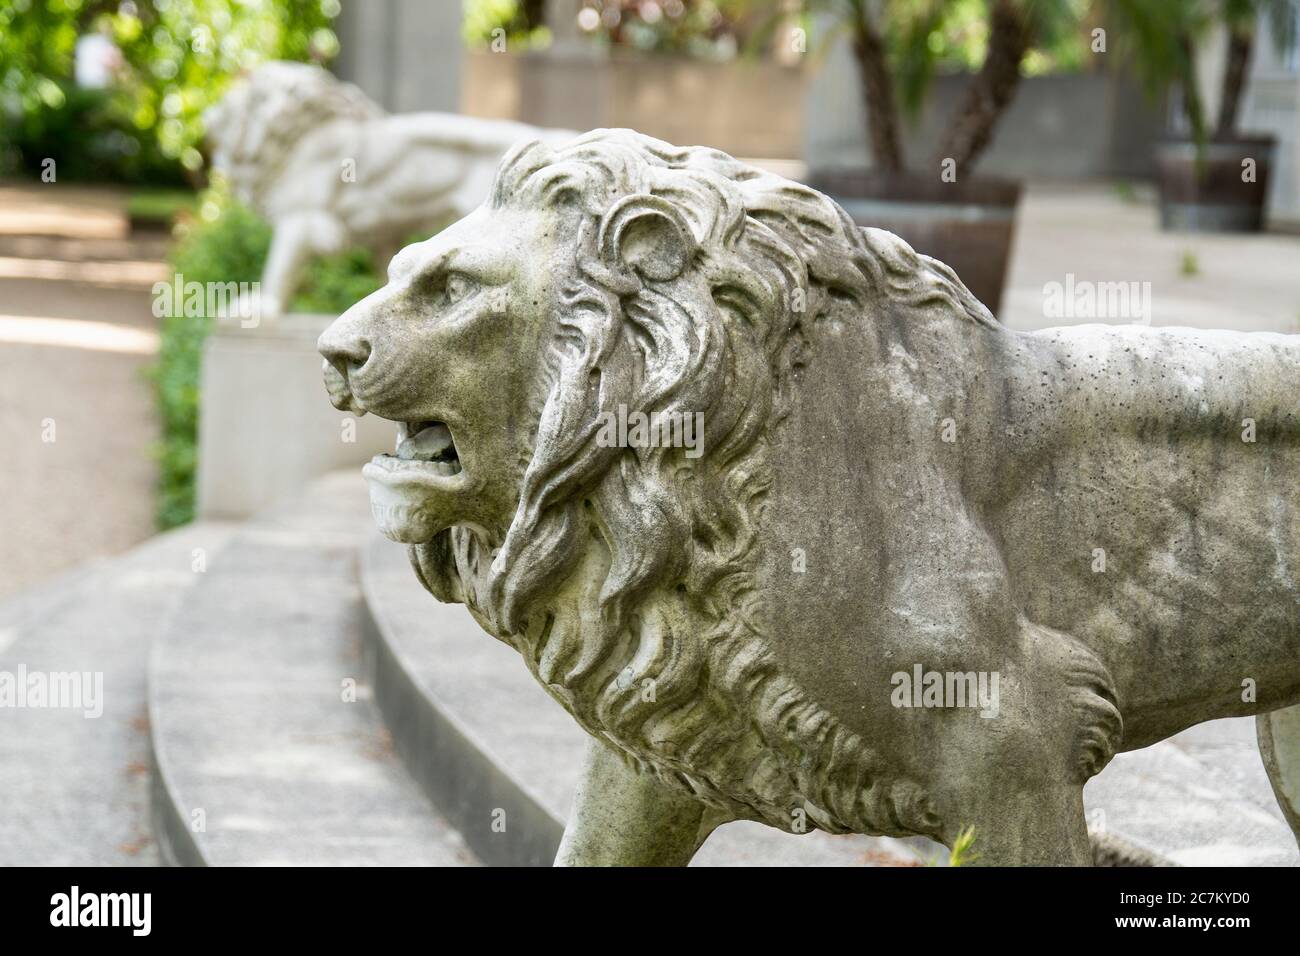 Berlin, Wannsee, House of the Wannsee Conference, garden, lion sculpture Stock Photo